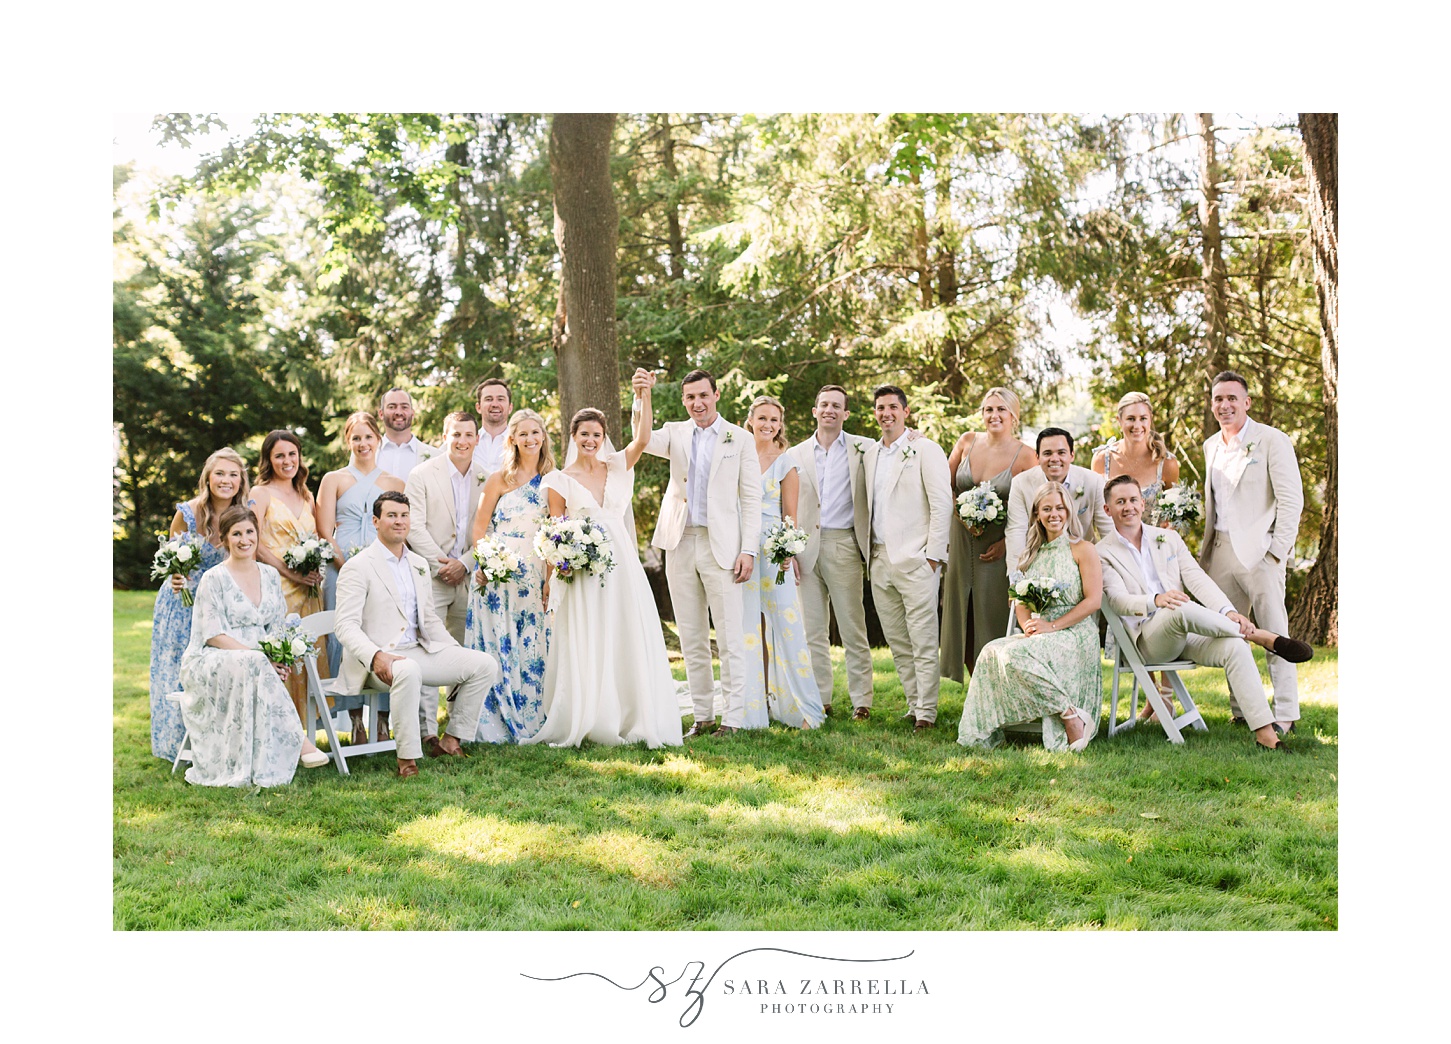 bride and groom pose with large wedding party in flower dresses and tan suits